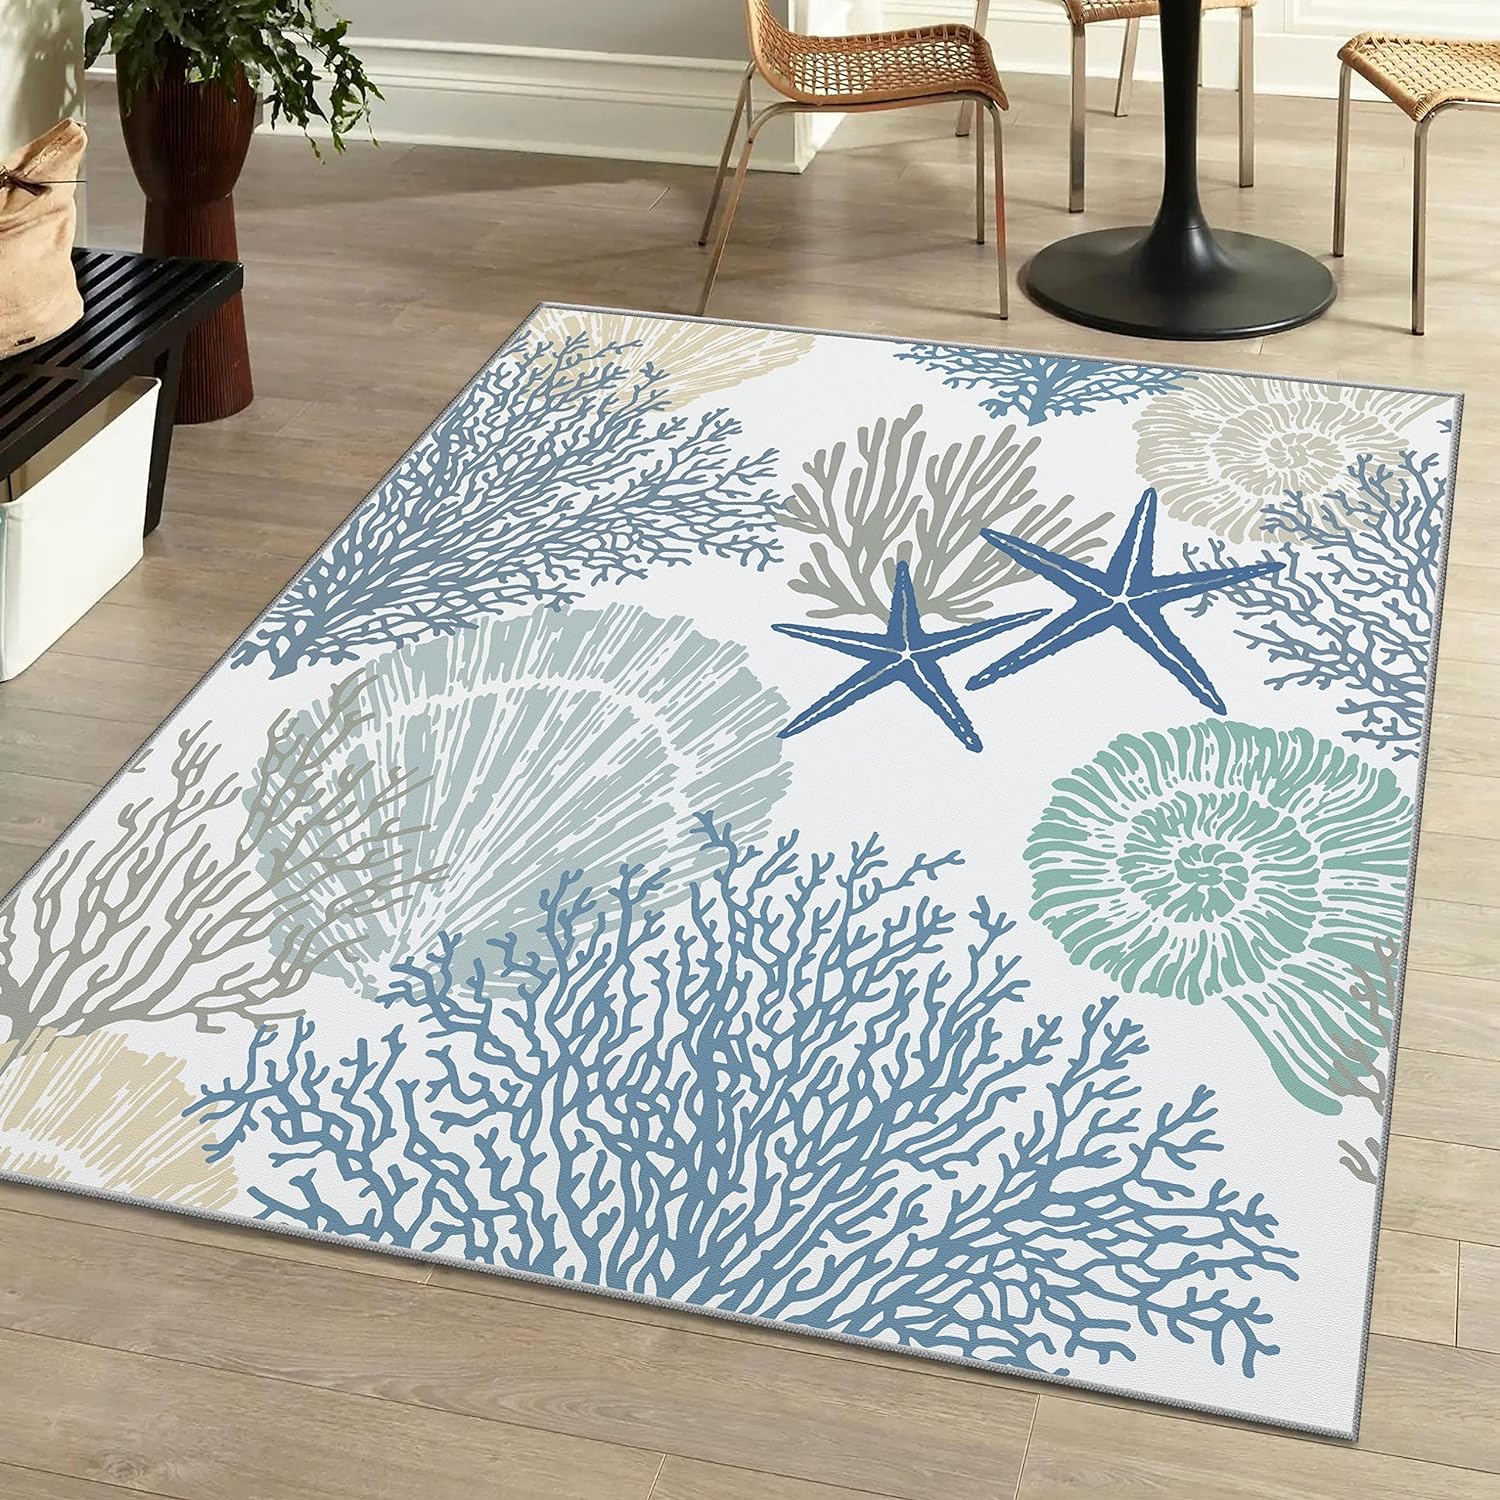 I love this rug it' easy clean. It has a thick border all around it and it looked. It seems to be very durable. Would recommend this to all my friends.